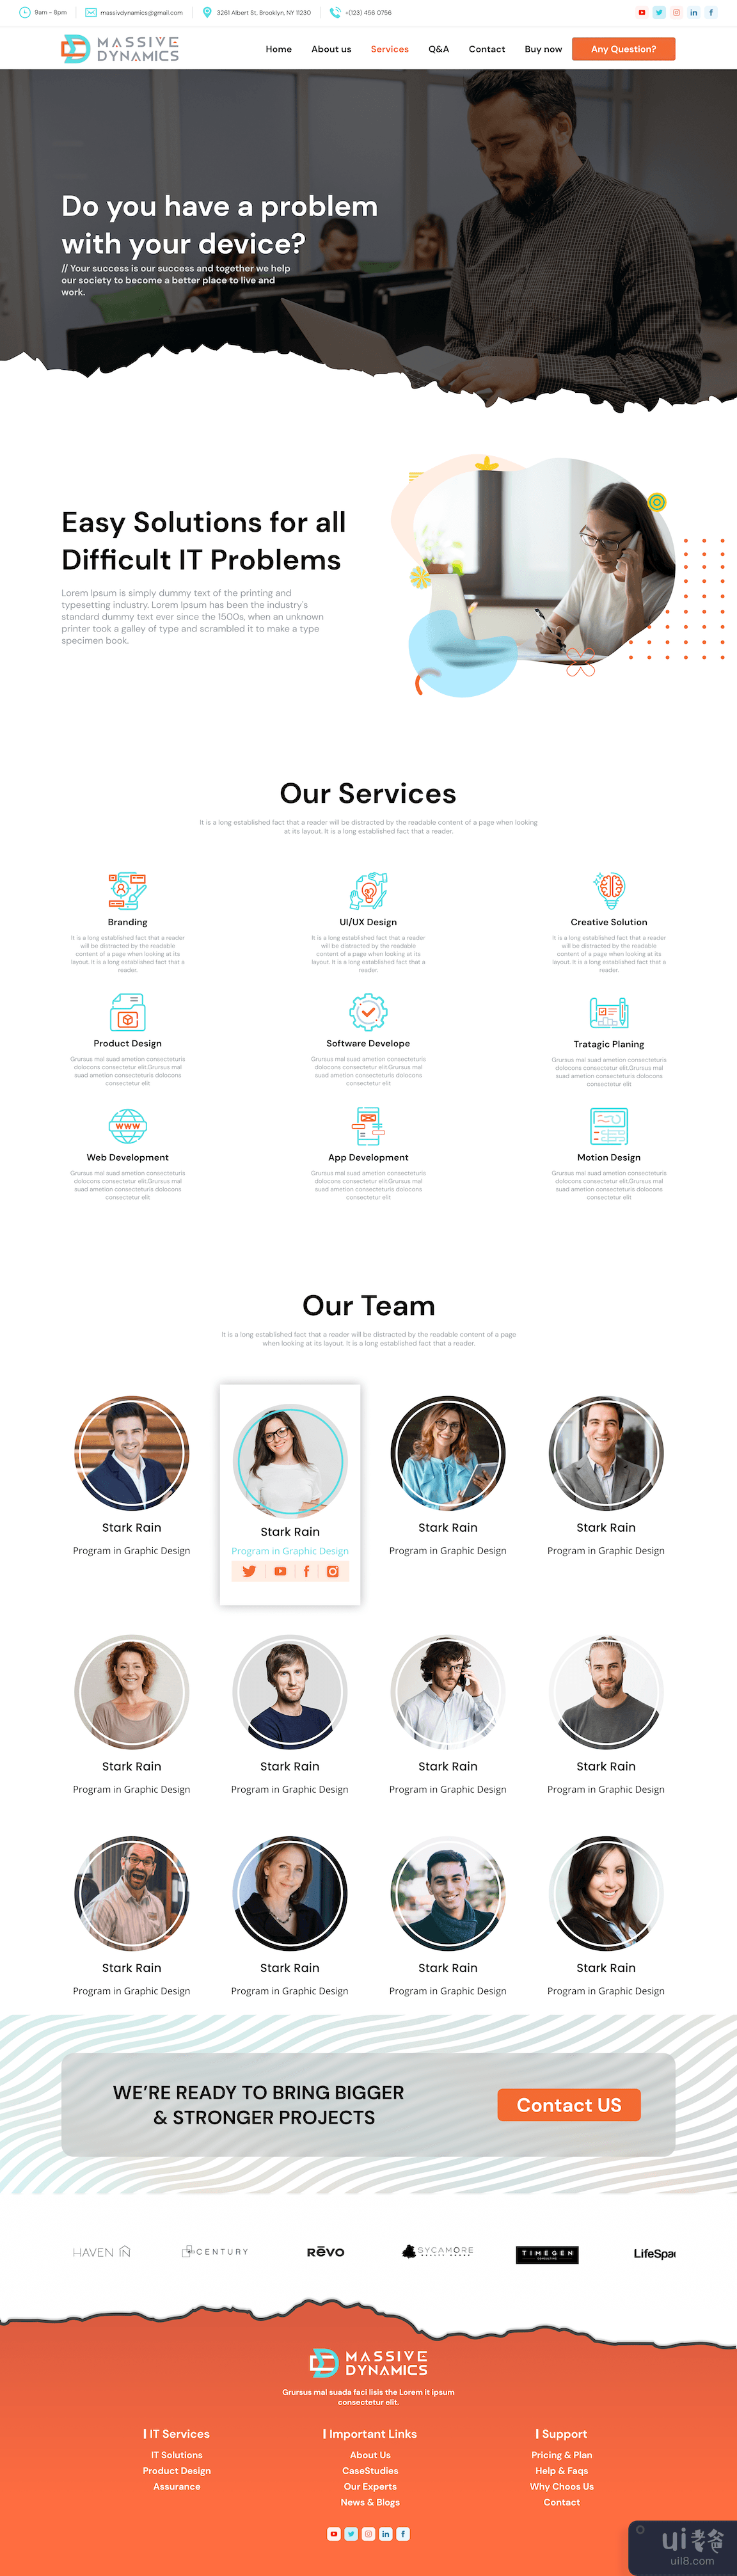 IT公司的服务和网站模板(IT Company's Services and Website Template)插图2